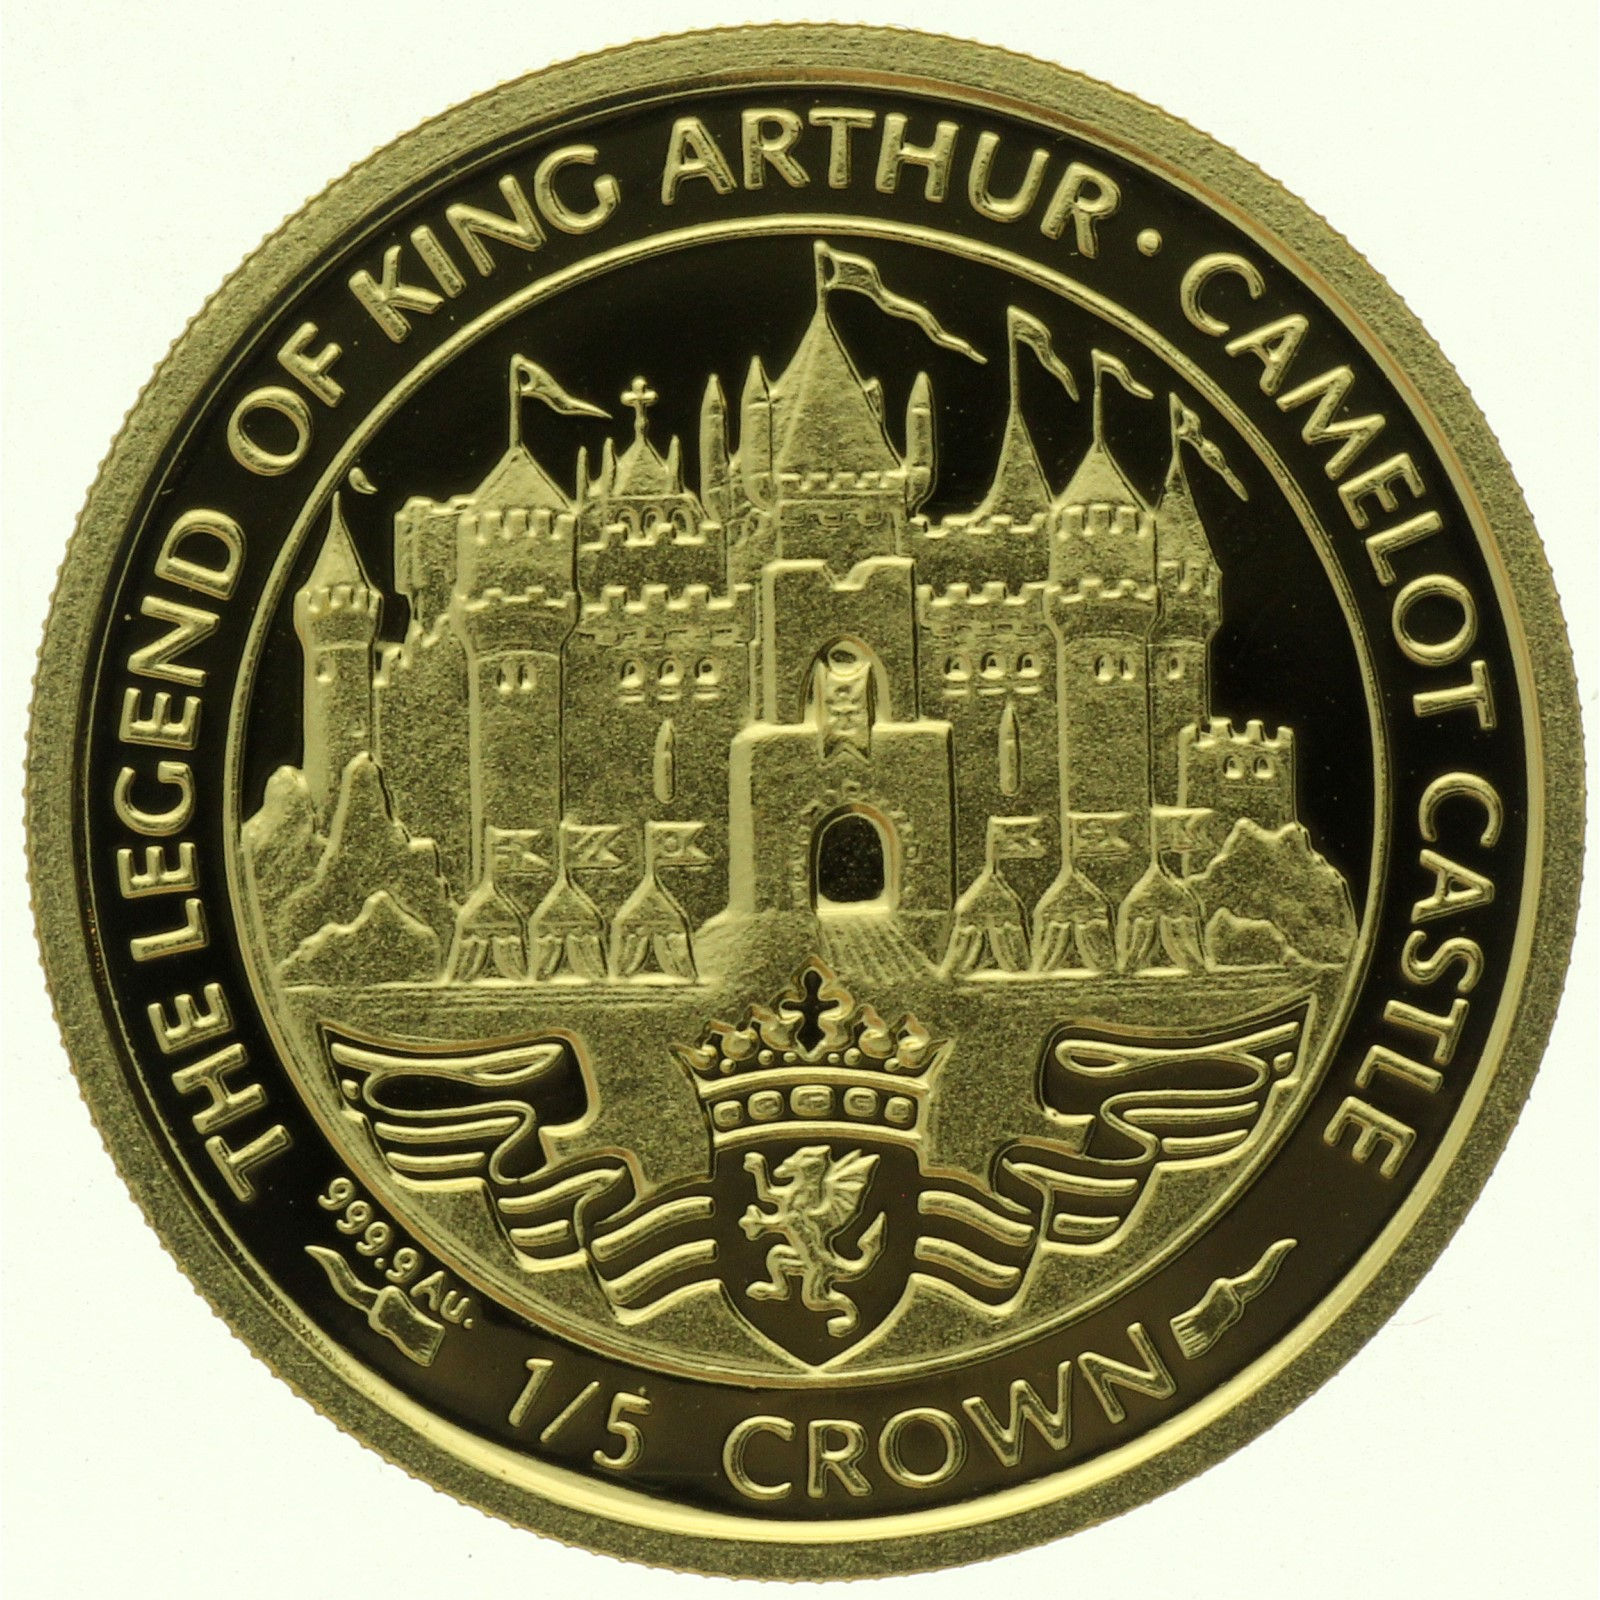 Isle of Man - 1/5 crown - 1996 - Camelot Castle